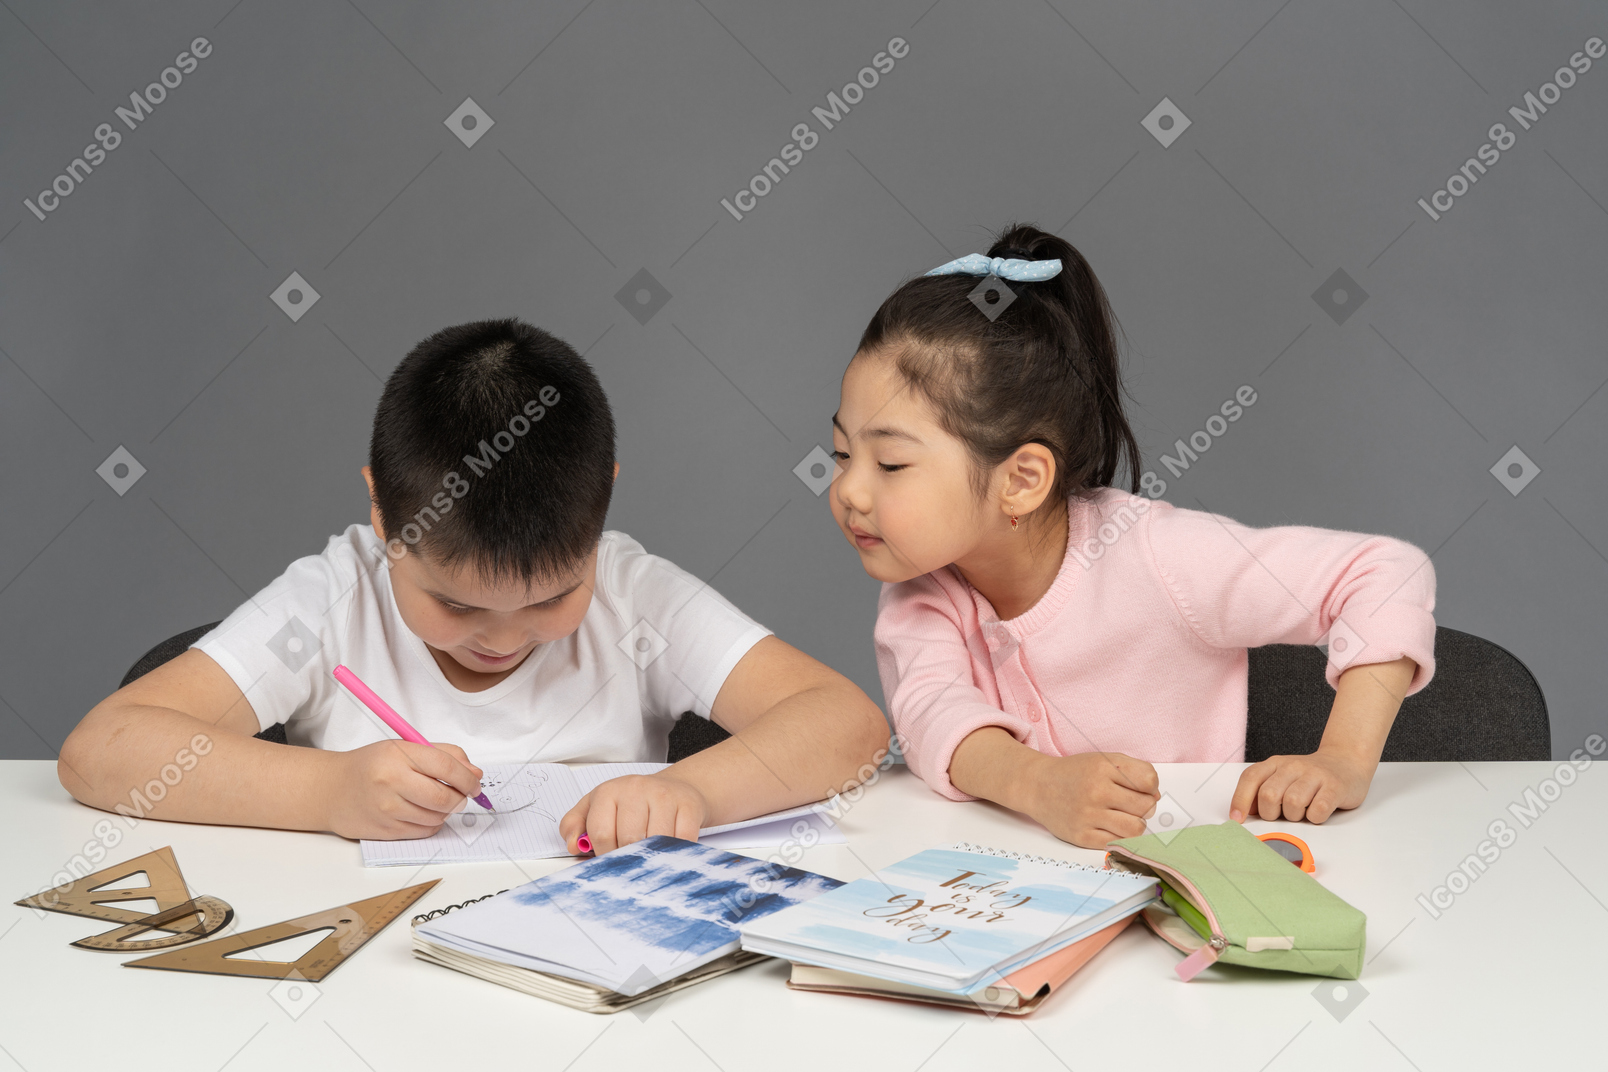 Sister watching her brother do homework